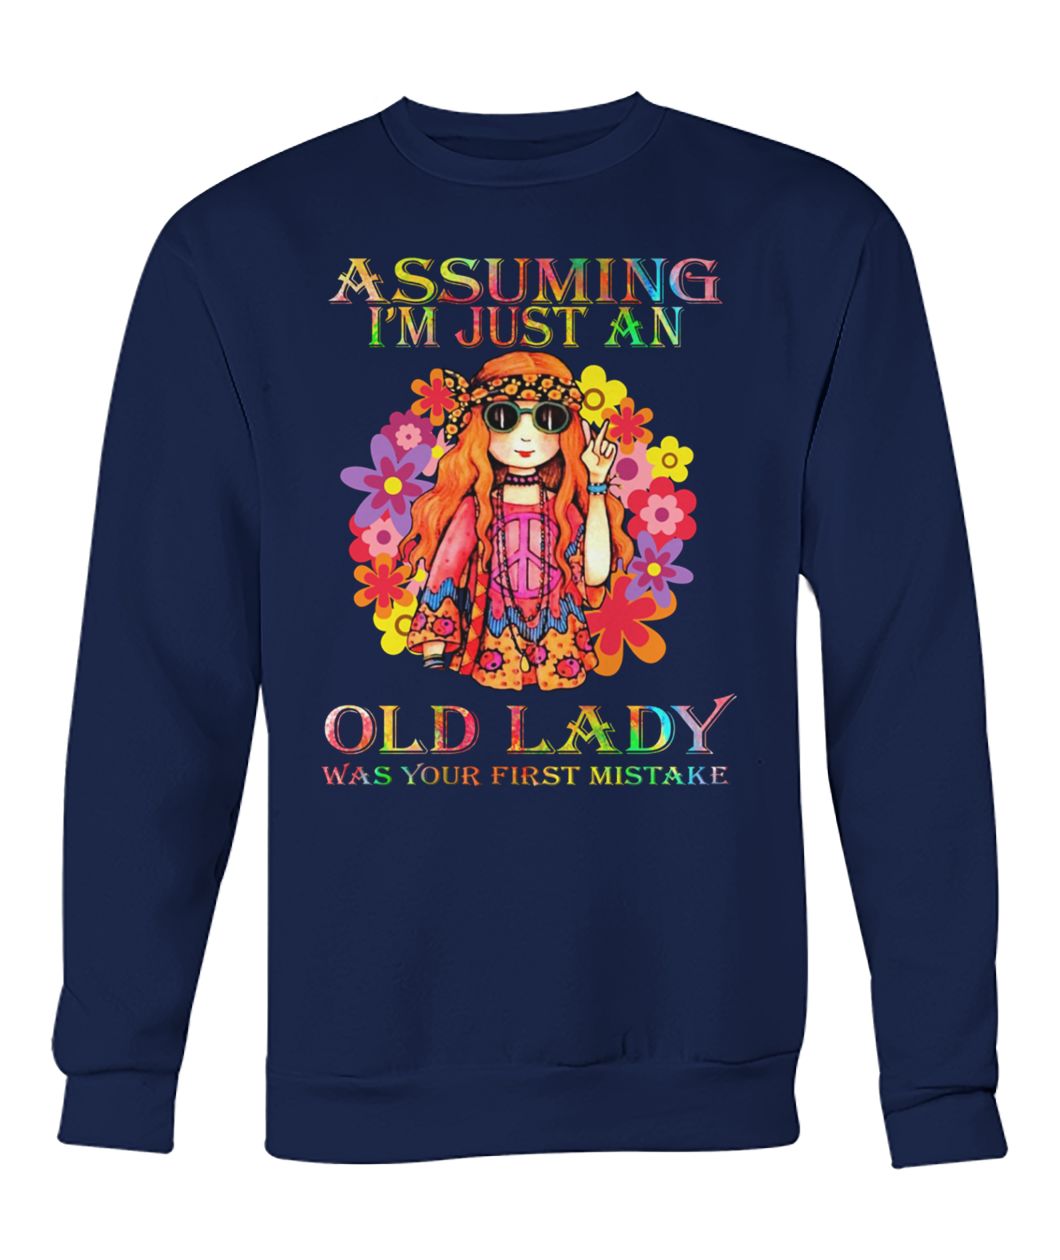 Hippe assuming I'm just an old lady was your first mistake hippe crew neck sweatshirt